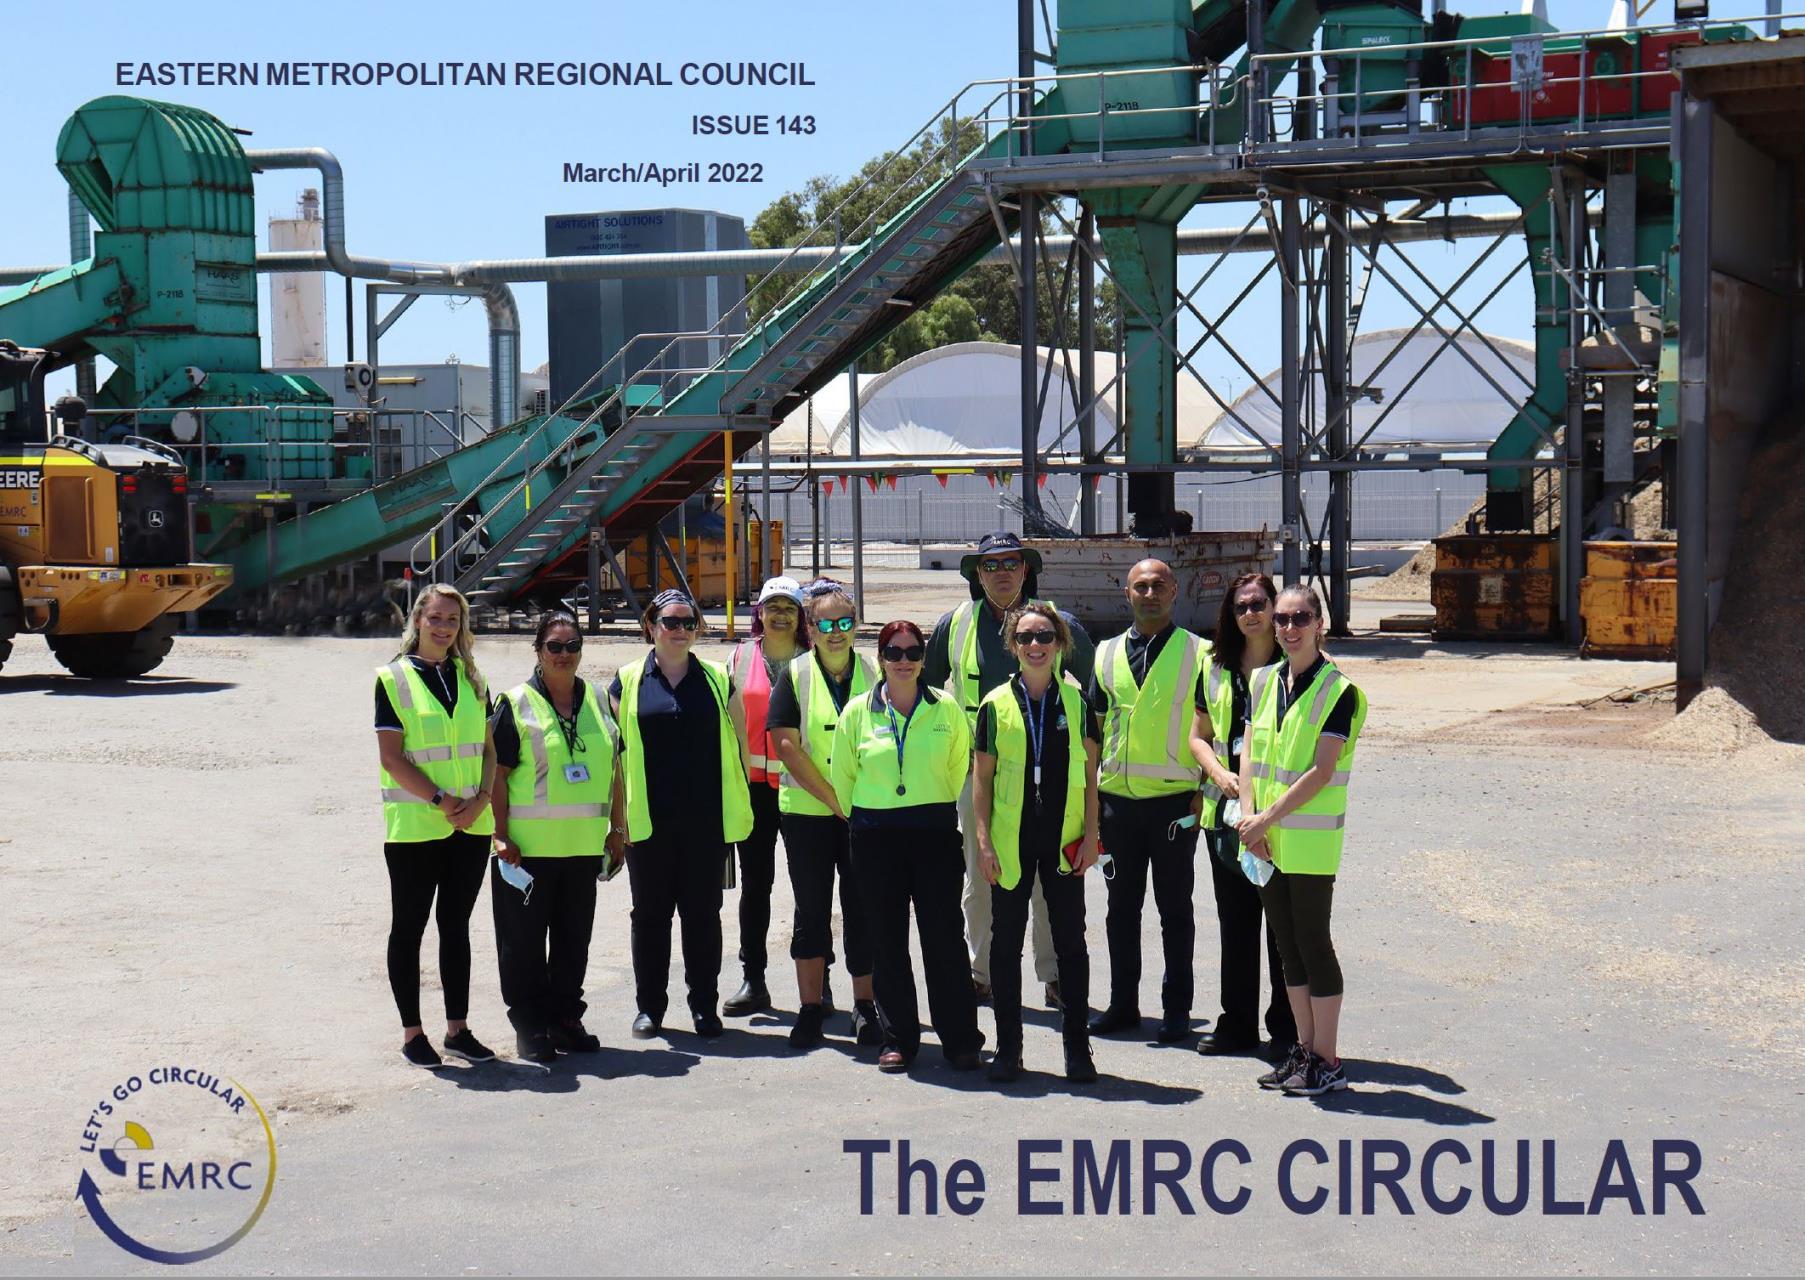 Keep yourself up to date - the latest EMRC Circular is now online